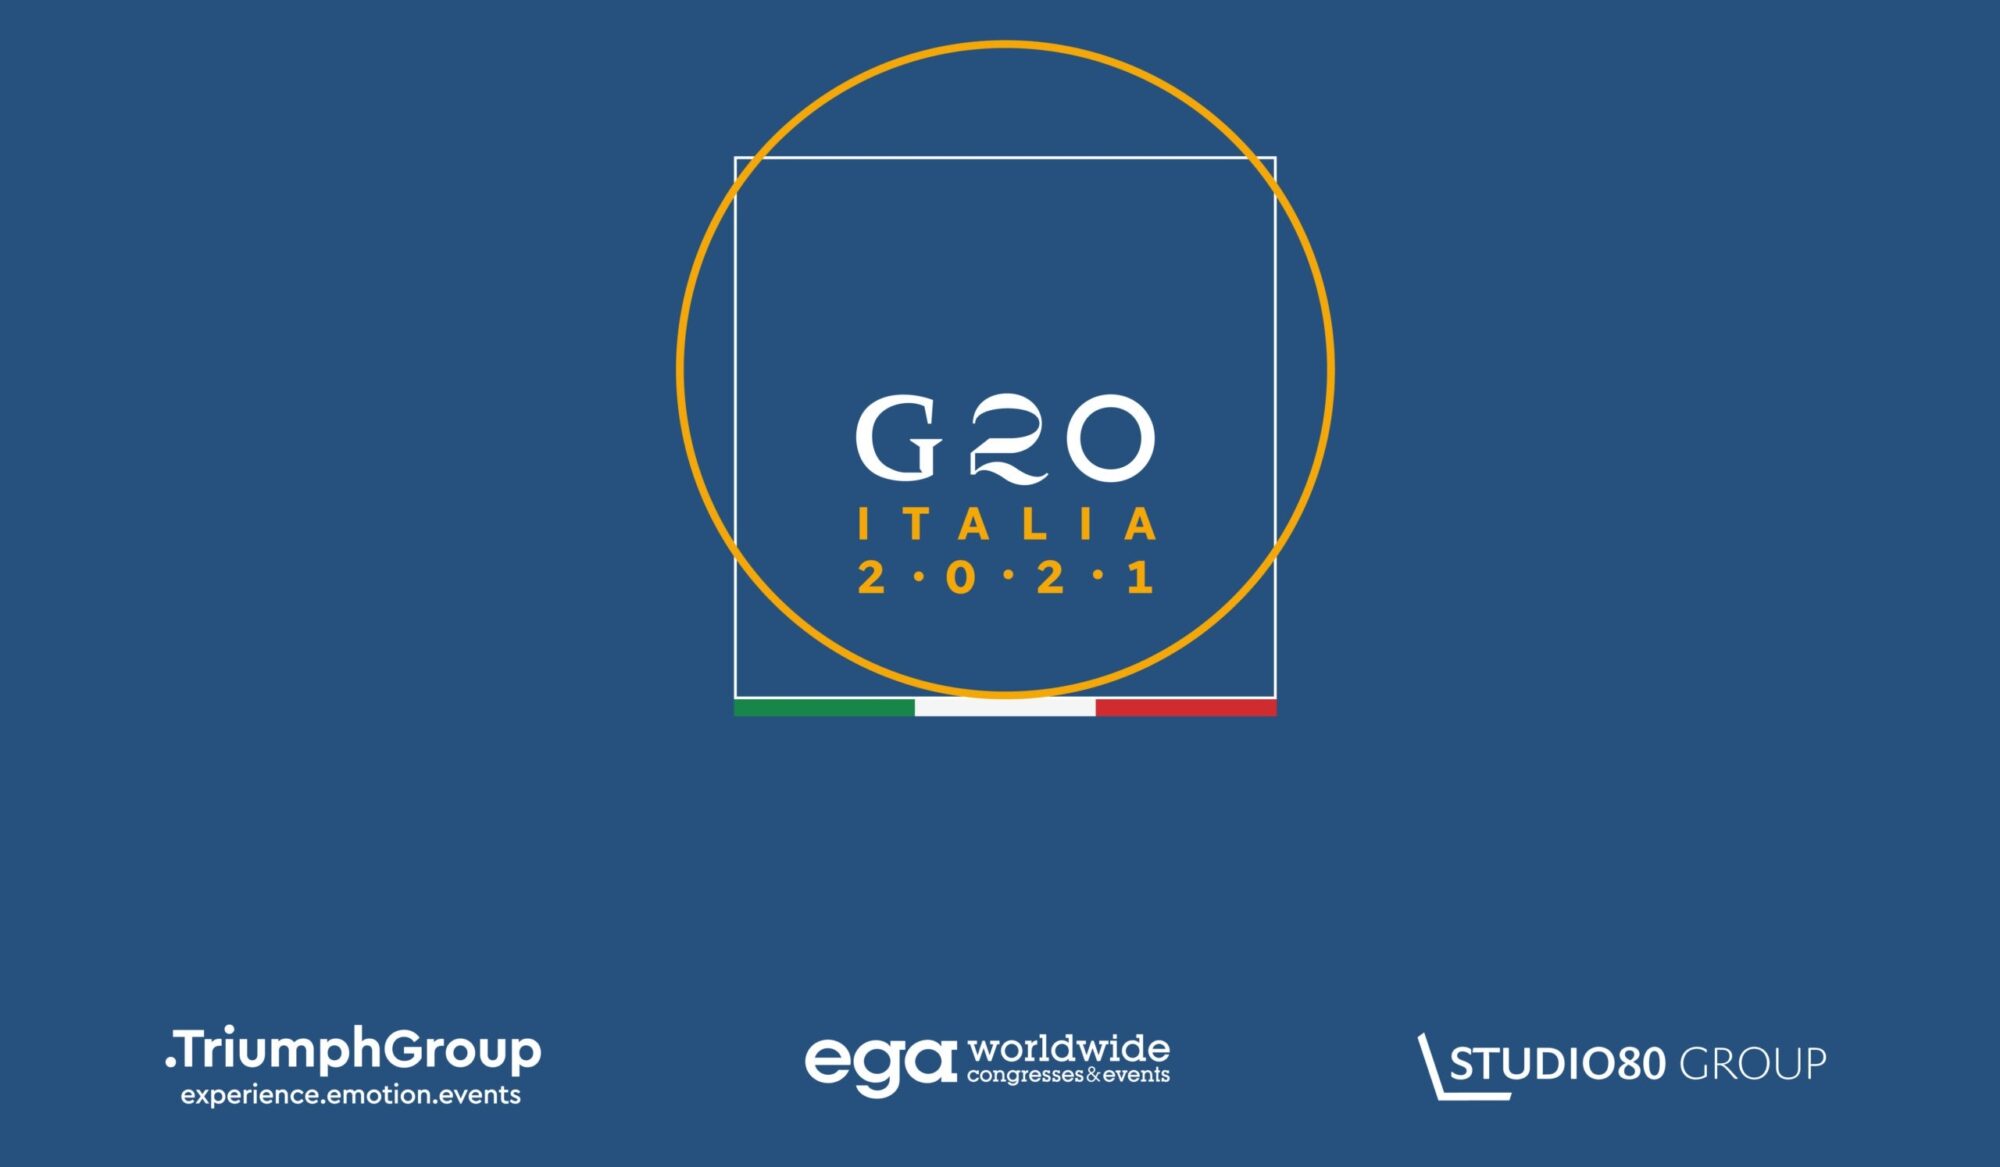 It’s official: the temporary joint venture formed by Triumph Group International, Ega Worldwide congresses & events and Studio 80 Group will plan the G20 Summit in Rome